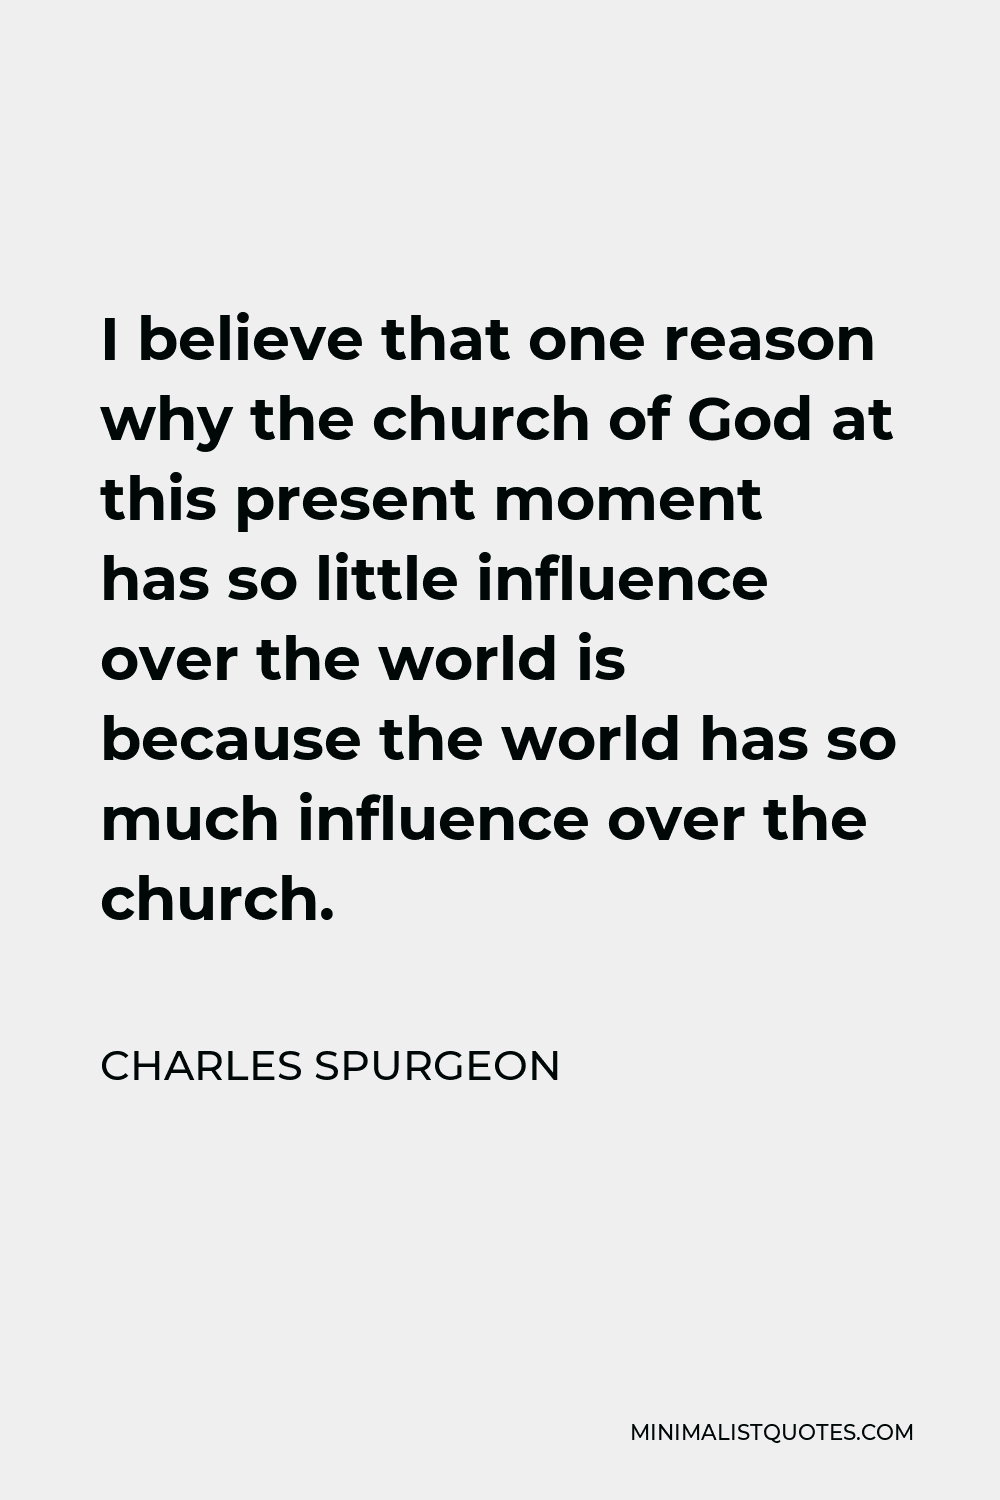 Charles Spurgeon Quote - I believe that one reason why the church of God at this present moment has so little influence over the world is because the world has so much influence over the church.